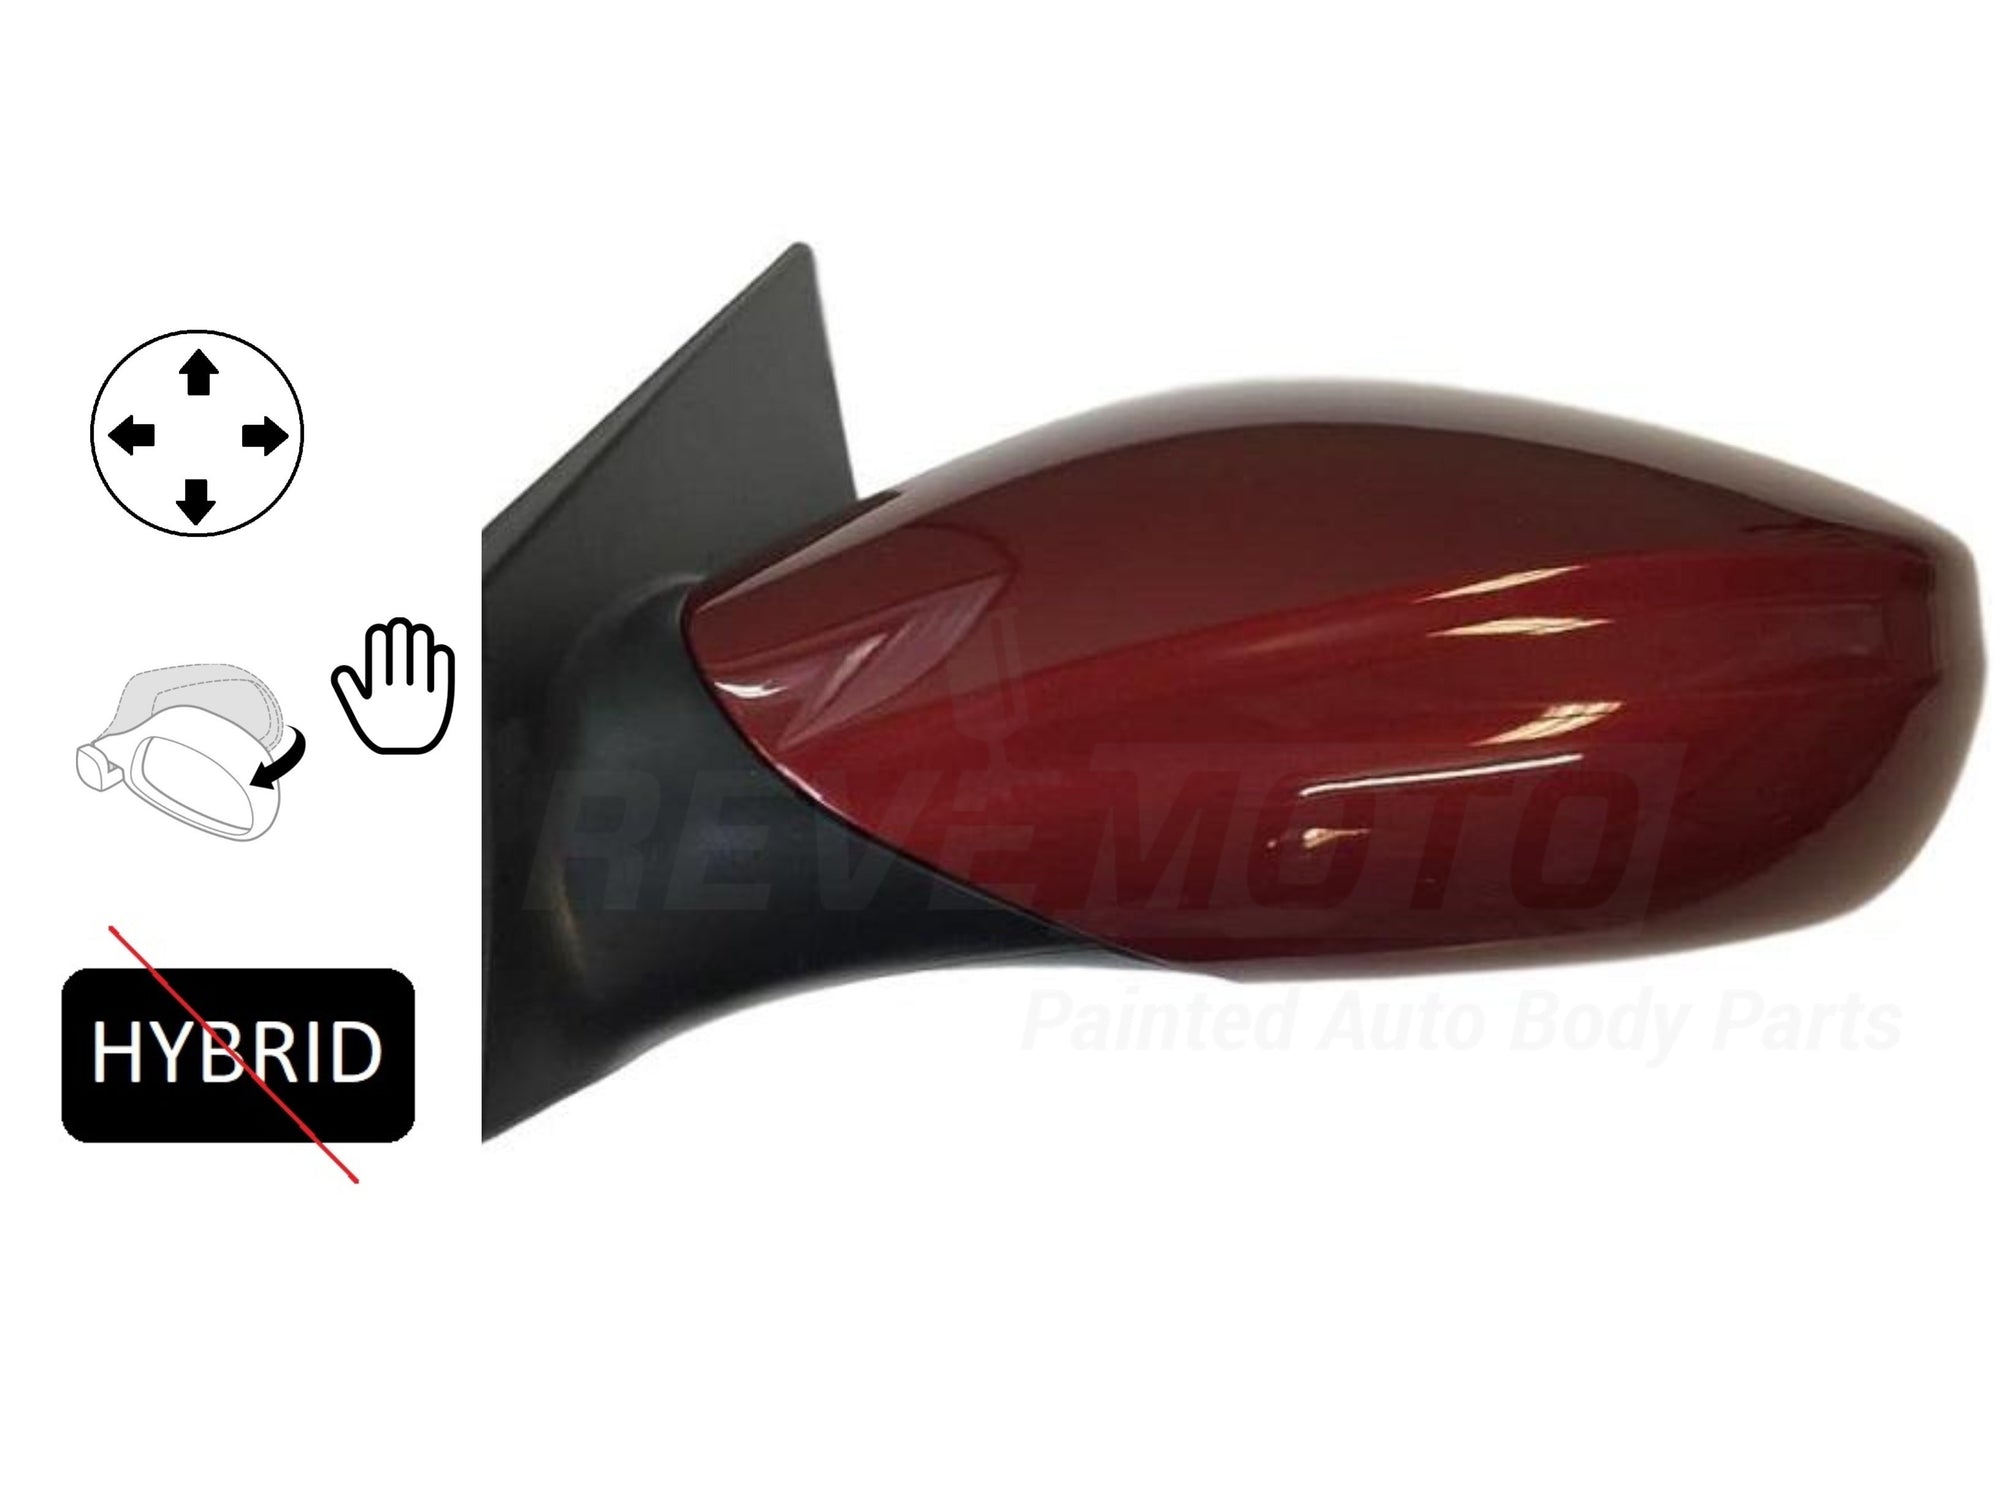 2013_Hyundai_Sonata_Driver_Side_View_Mirror_Non-Heated_wo_Turn_Signal_Power_Manual_Folding_Except_Hybrid_Painted_Sparkling_Ruby_Red_T4_876103Q000